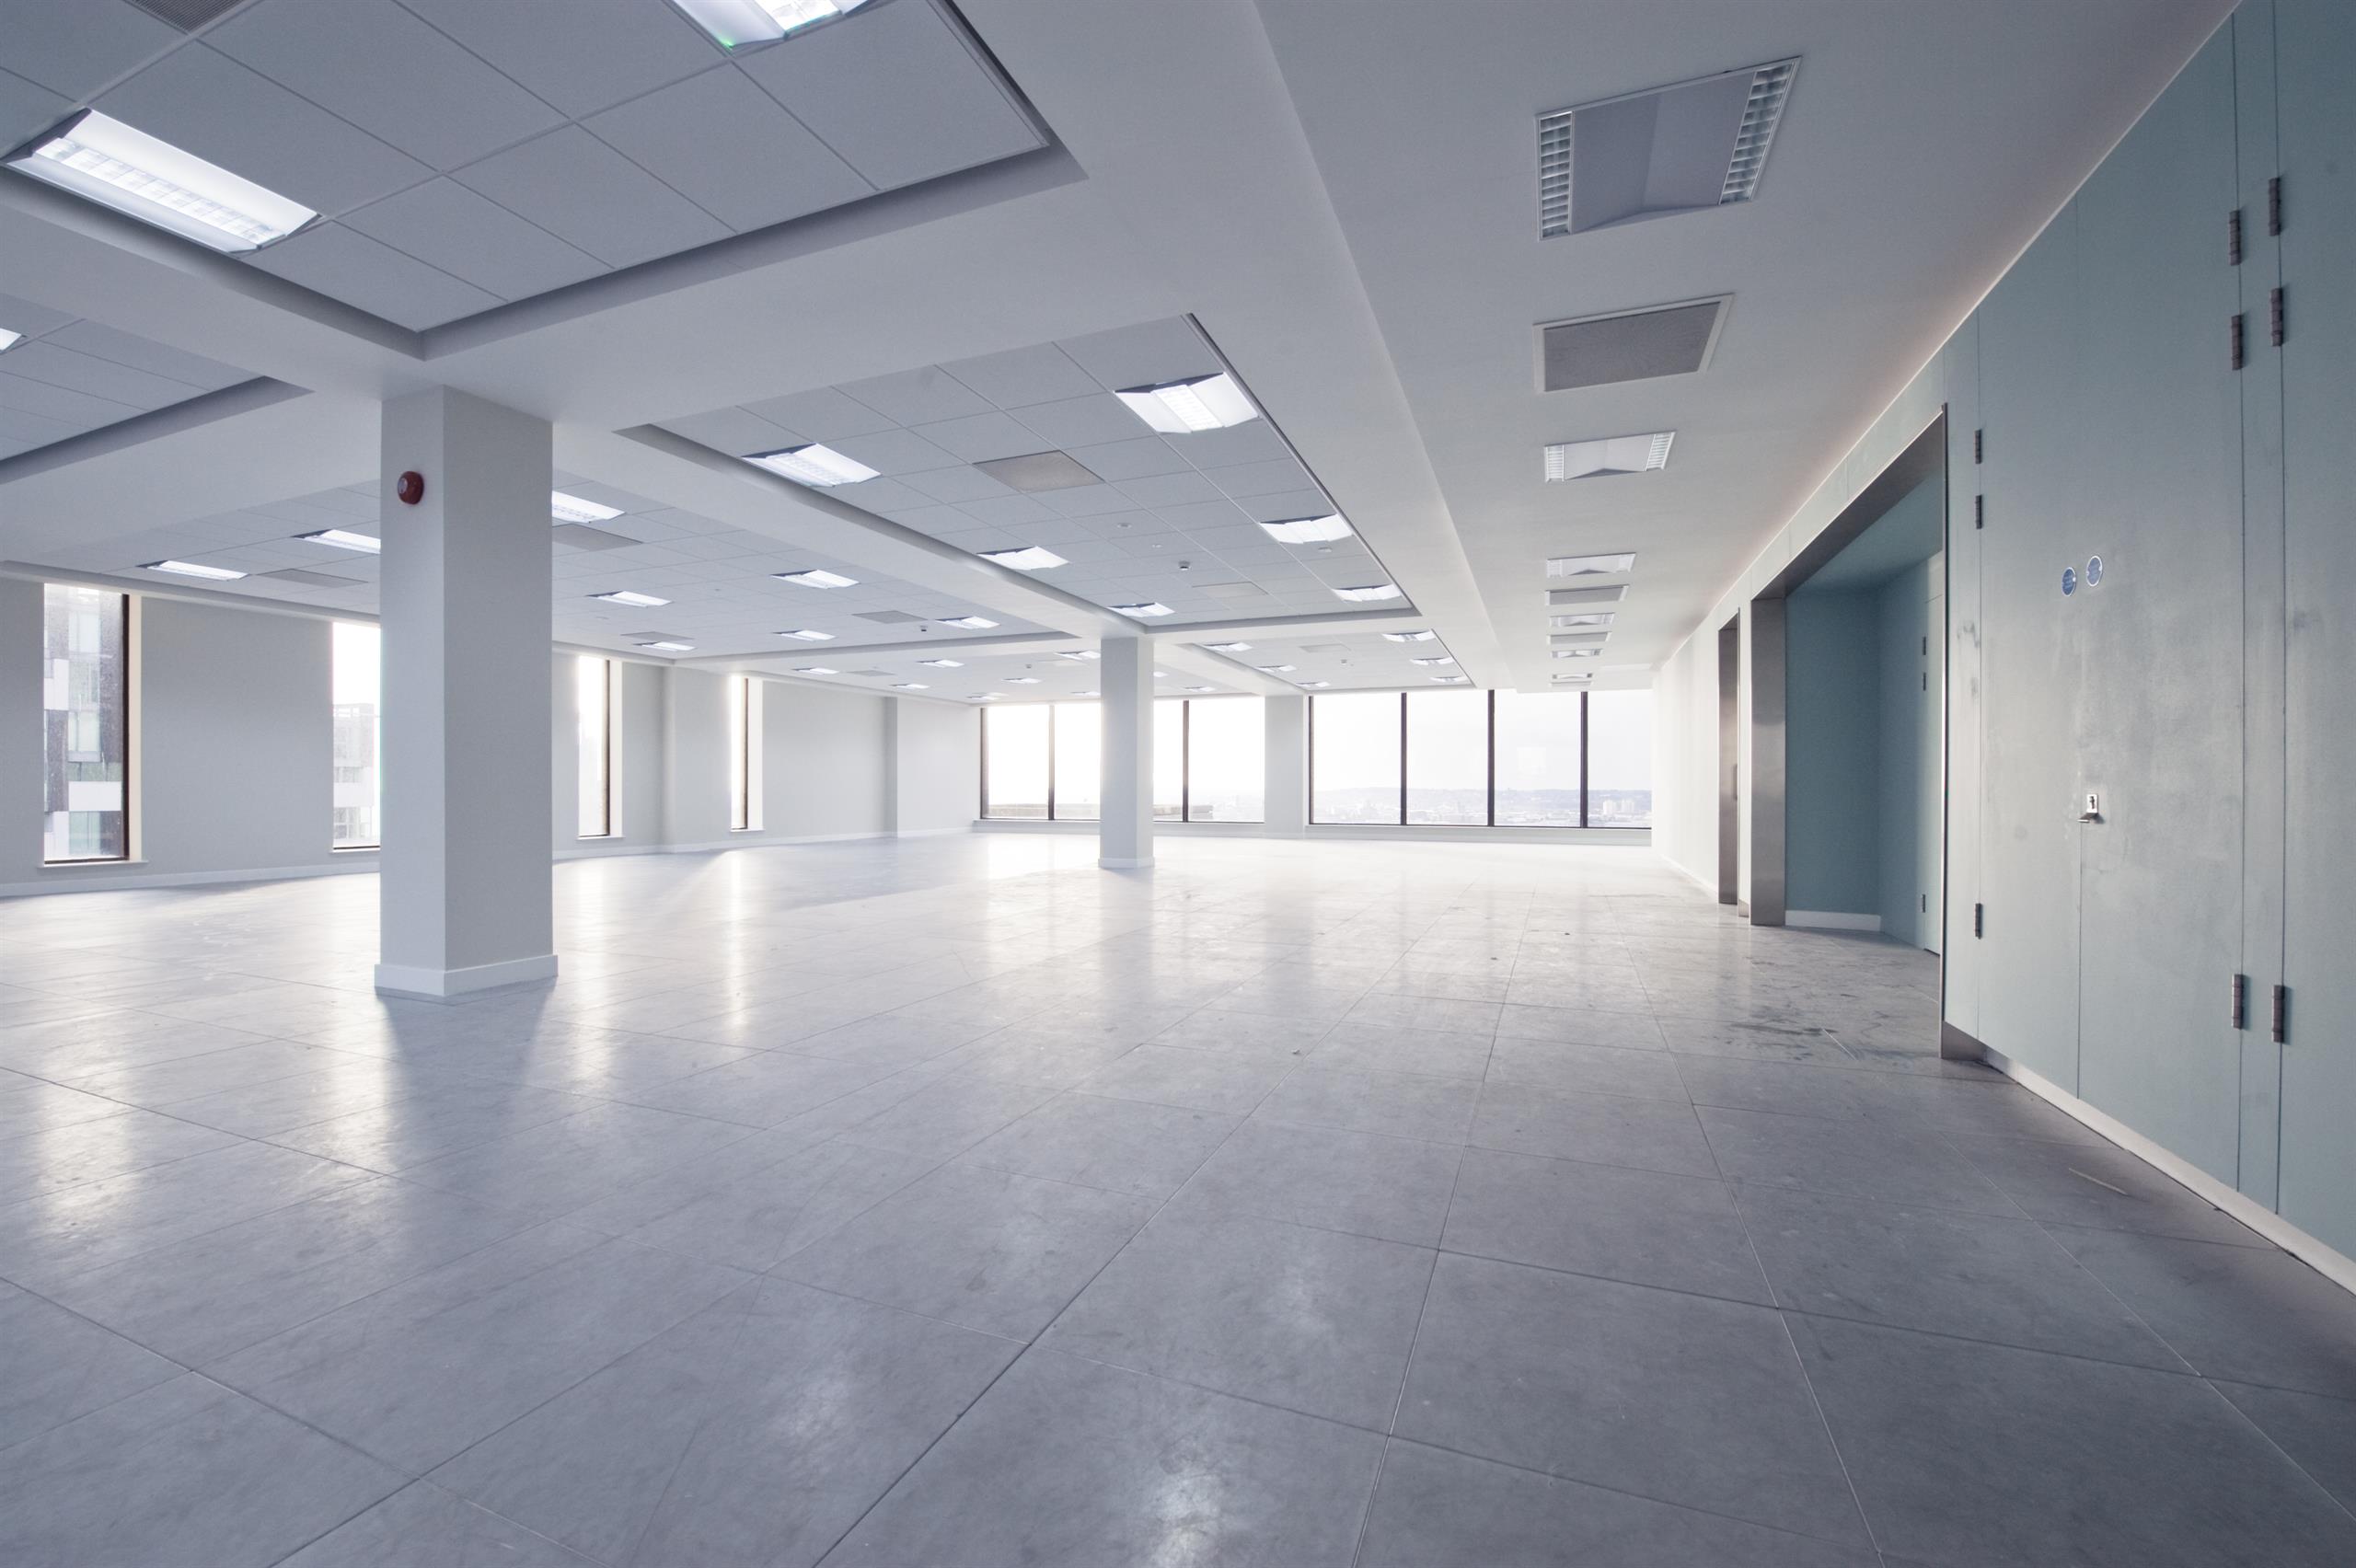 Our knowledge and skills allow us to maximise the amount of natural light a site can receive.